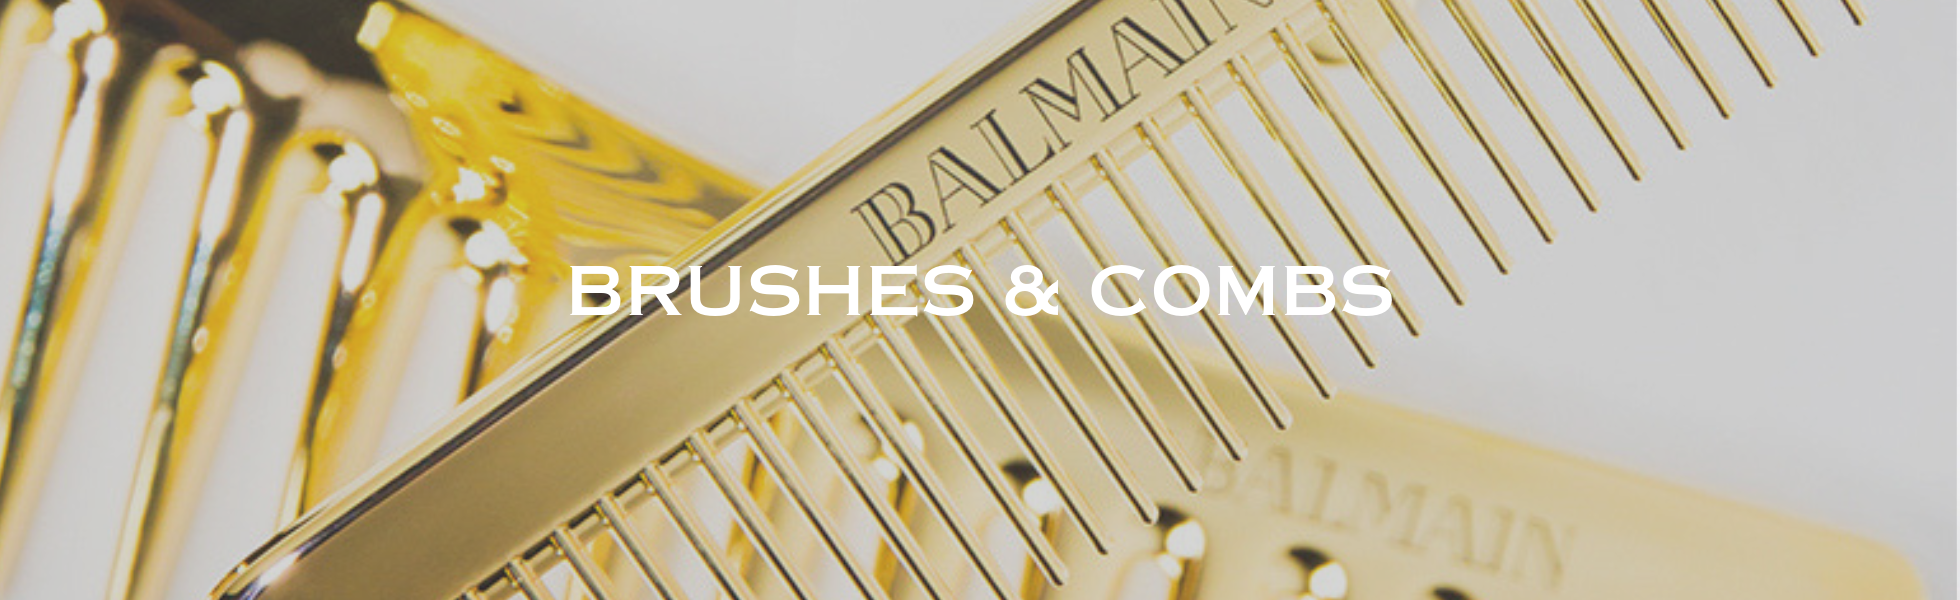 BRUSHES & COMBS